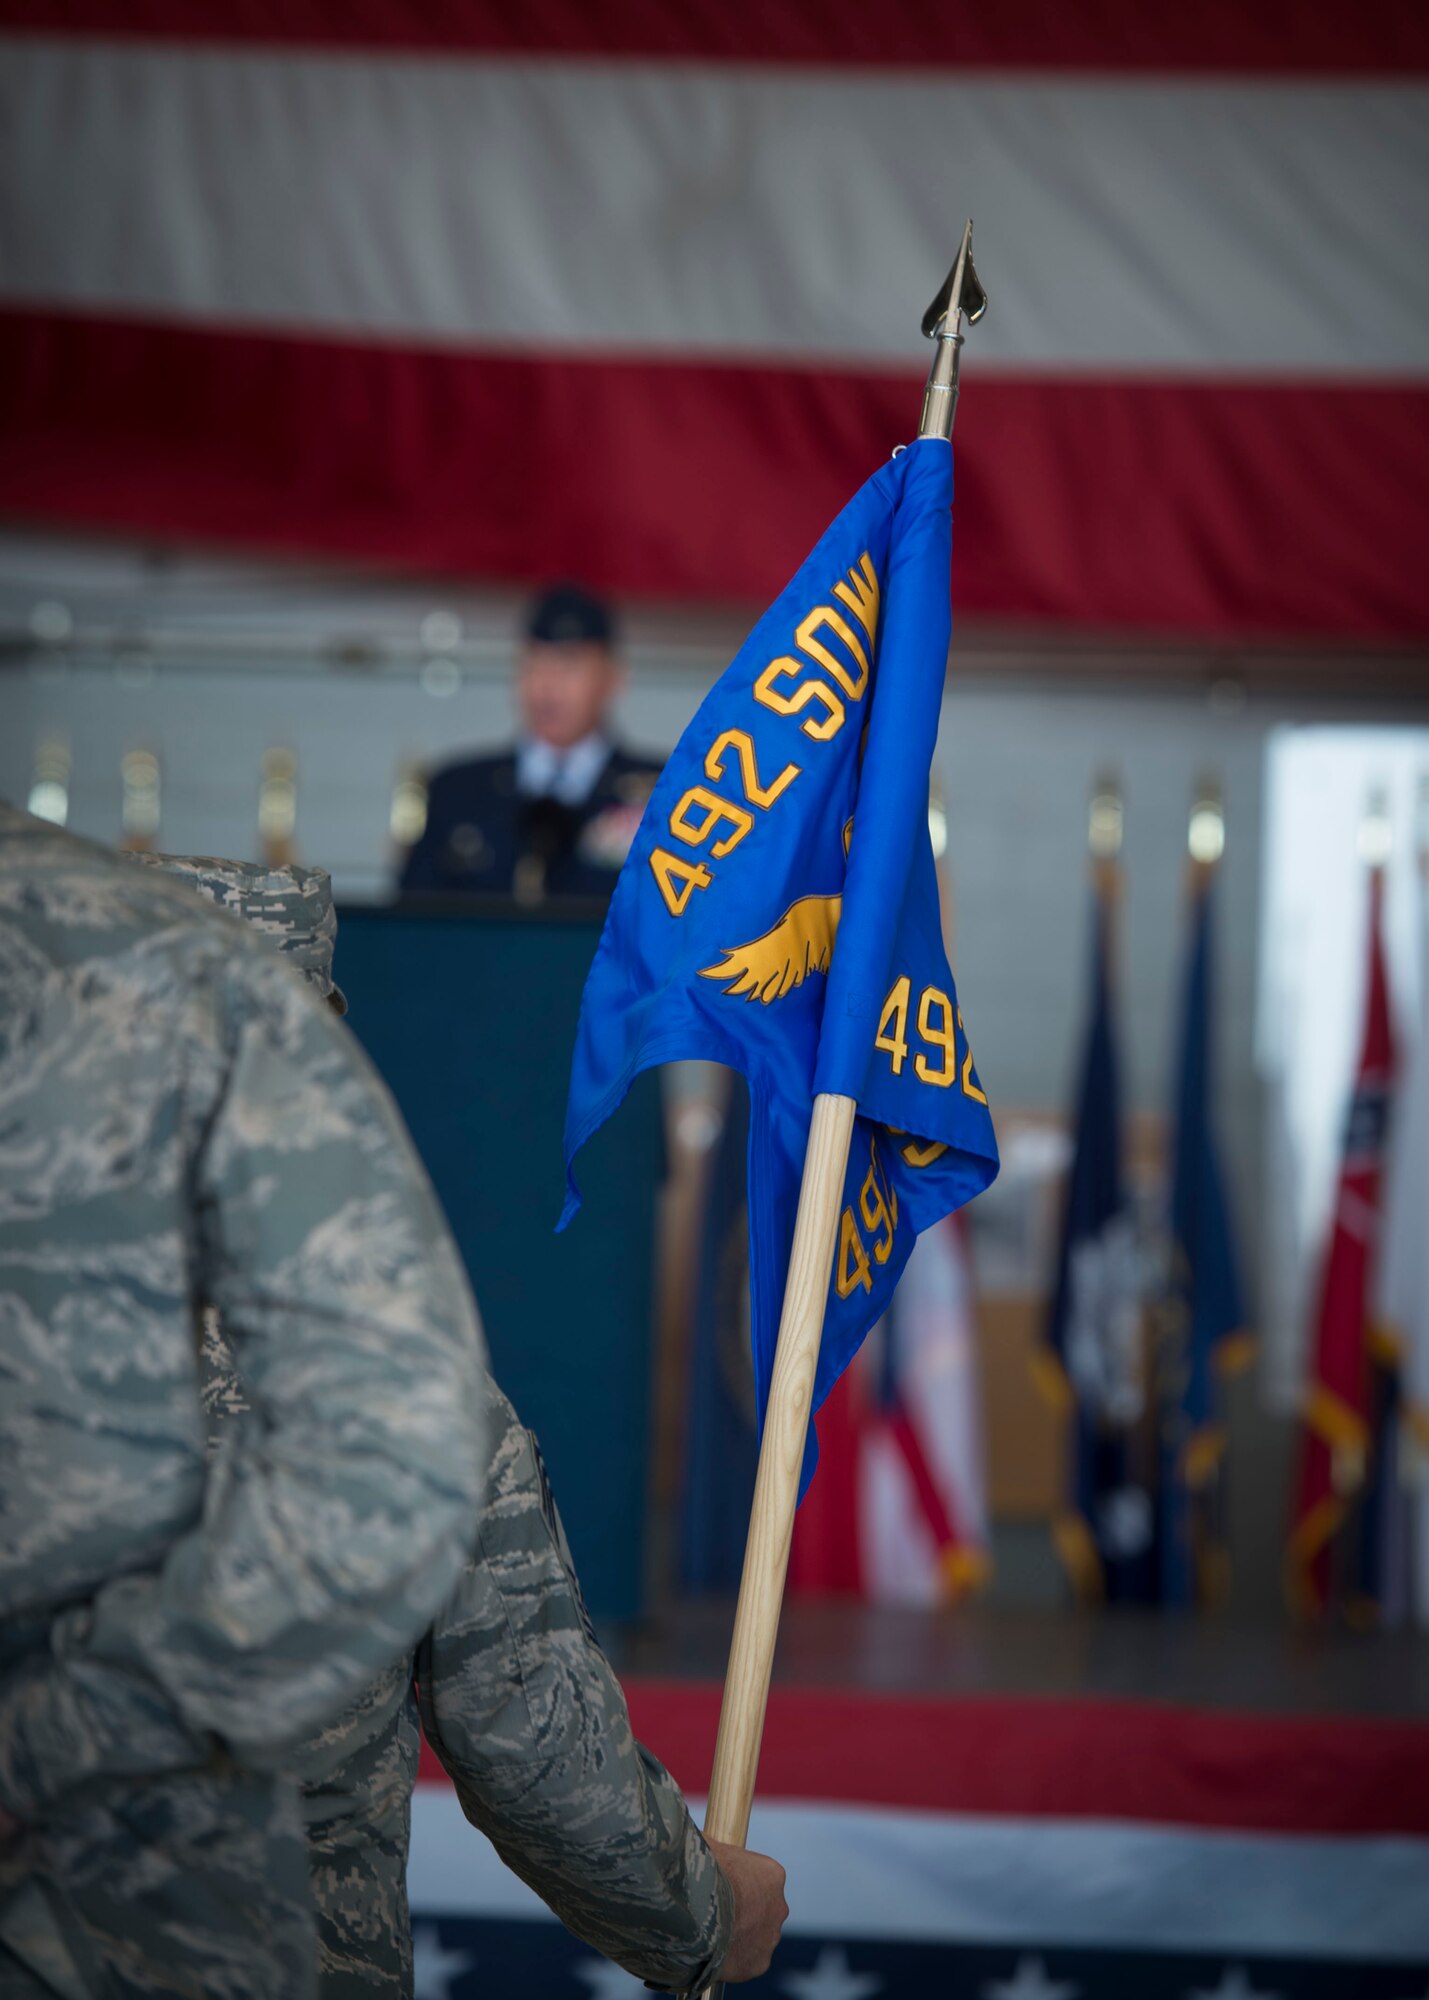 Col. Nathan Green, commander of the 492nd Special Operations Wing, speaks during an activation ceremony at Hurlburt Field, Fla., May 10, 2017. The designator for the 492nd SOW dates back to WWII when the 801st Bombardment Group was established at Harrington Field, England, in September 1943. Almost a year later, it would be redesignated as the 492nd Bombardment Group, a cover for their secret mission-Operation Carpetbagger. (U.S. Air Force photo by Senior Airman Krystal M. Garrett)